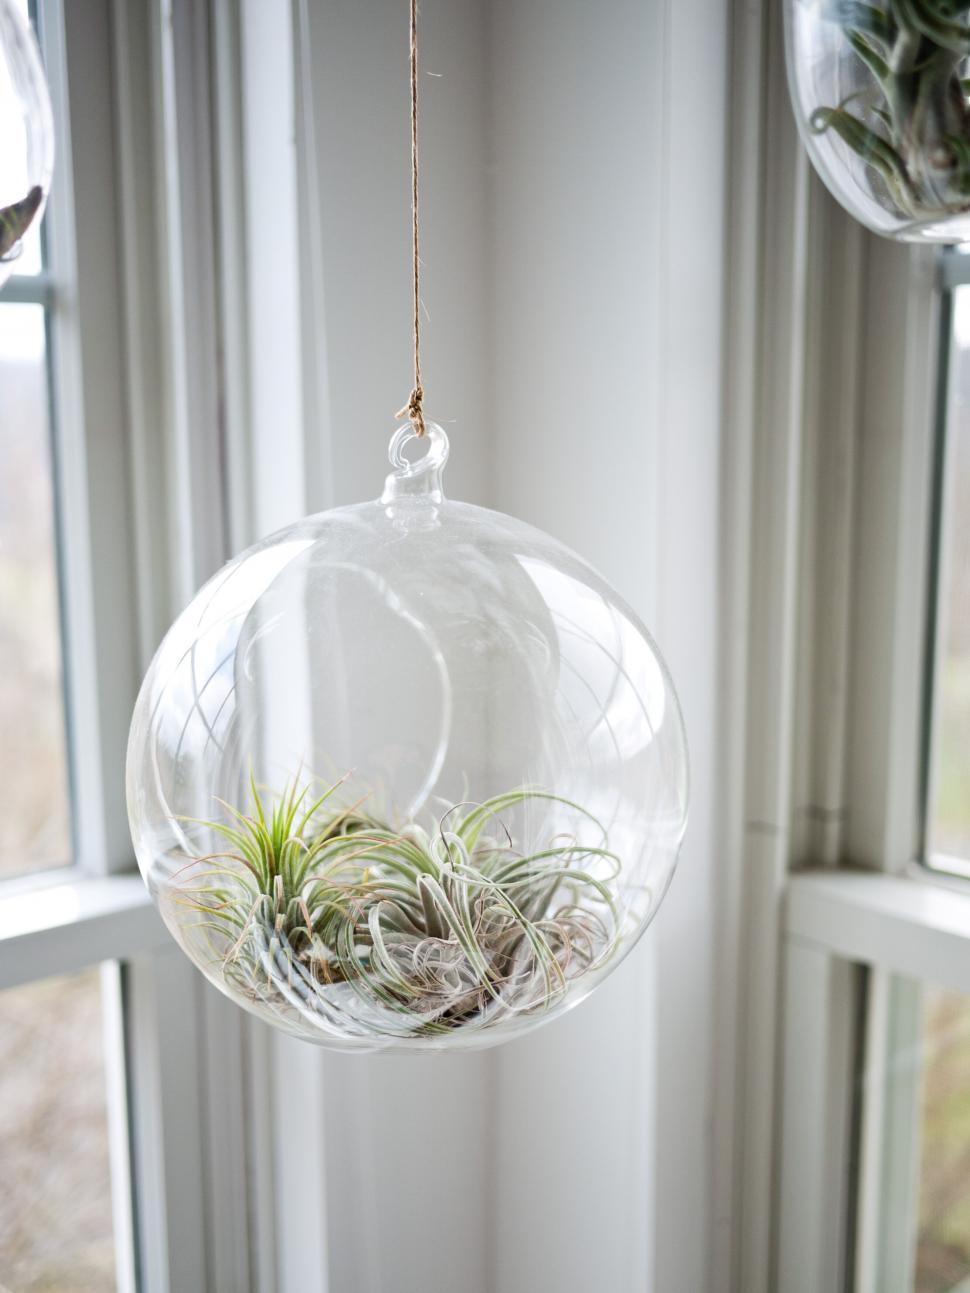 Free Image of Hanging glass terrarium with air plants 